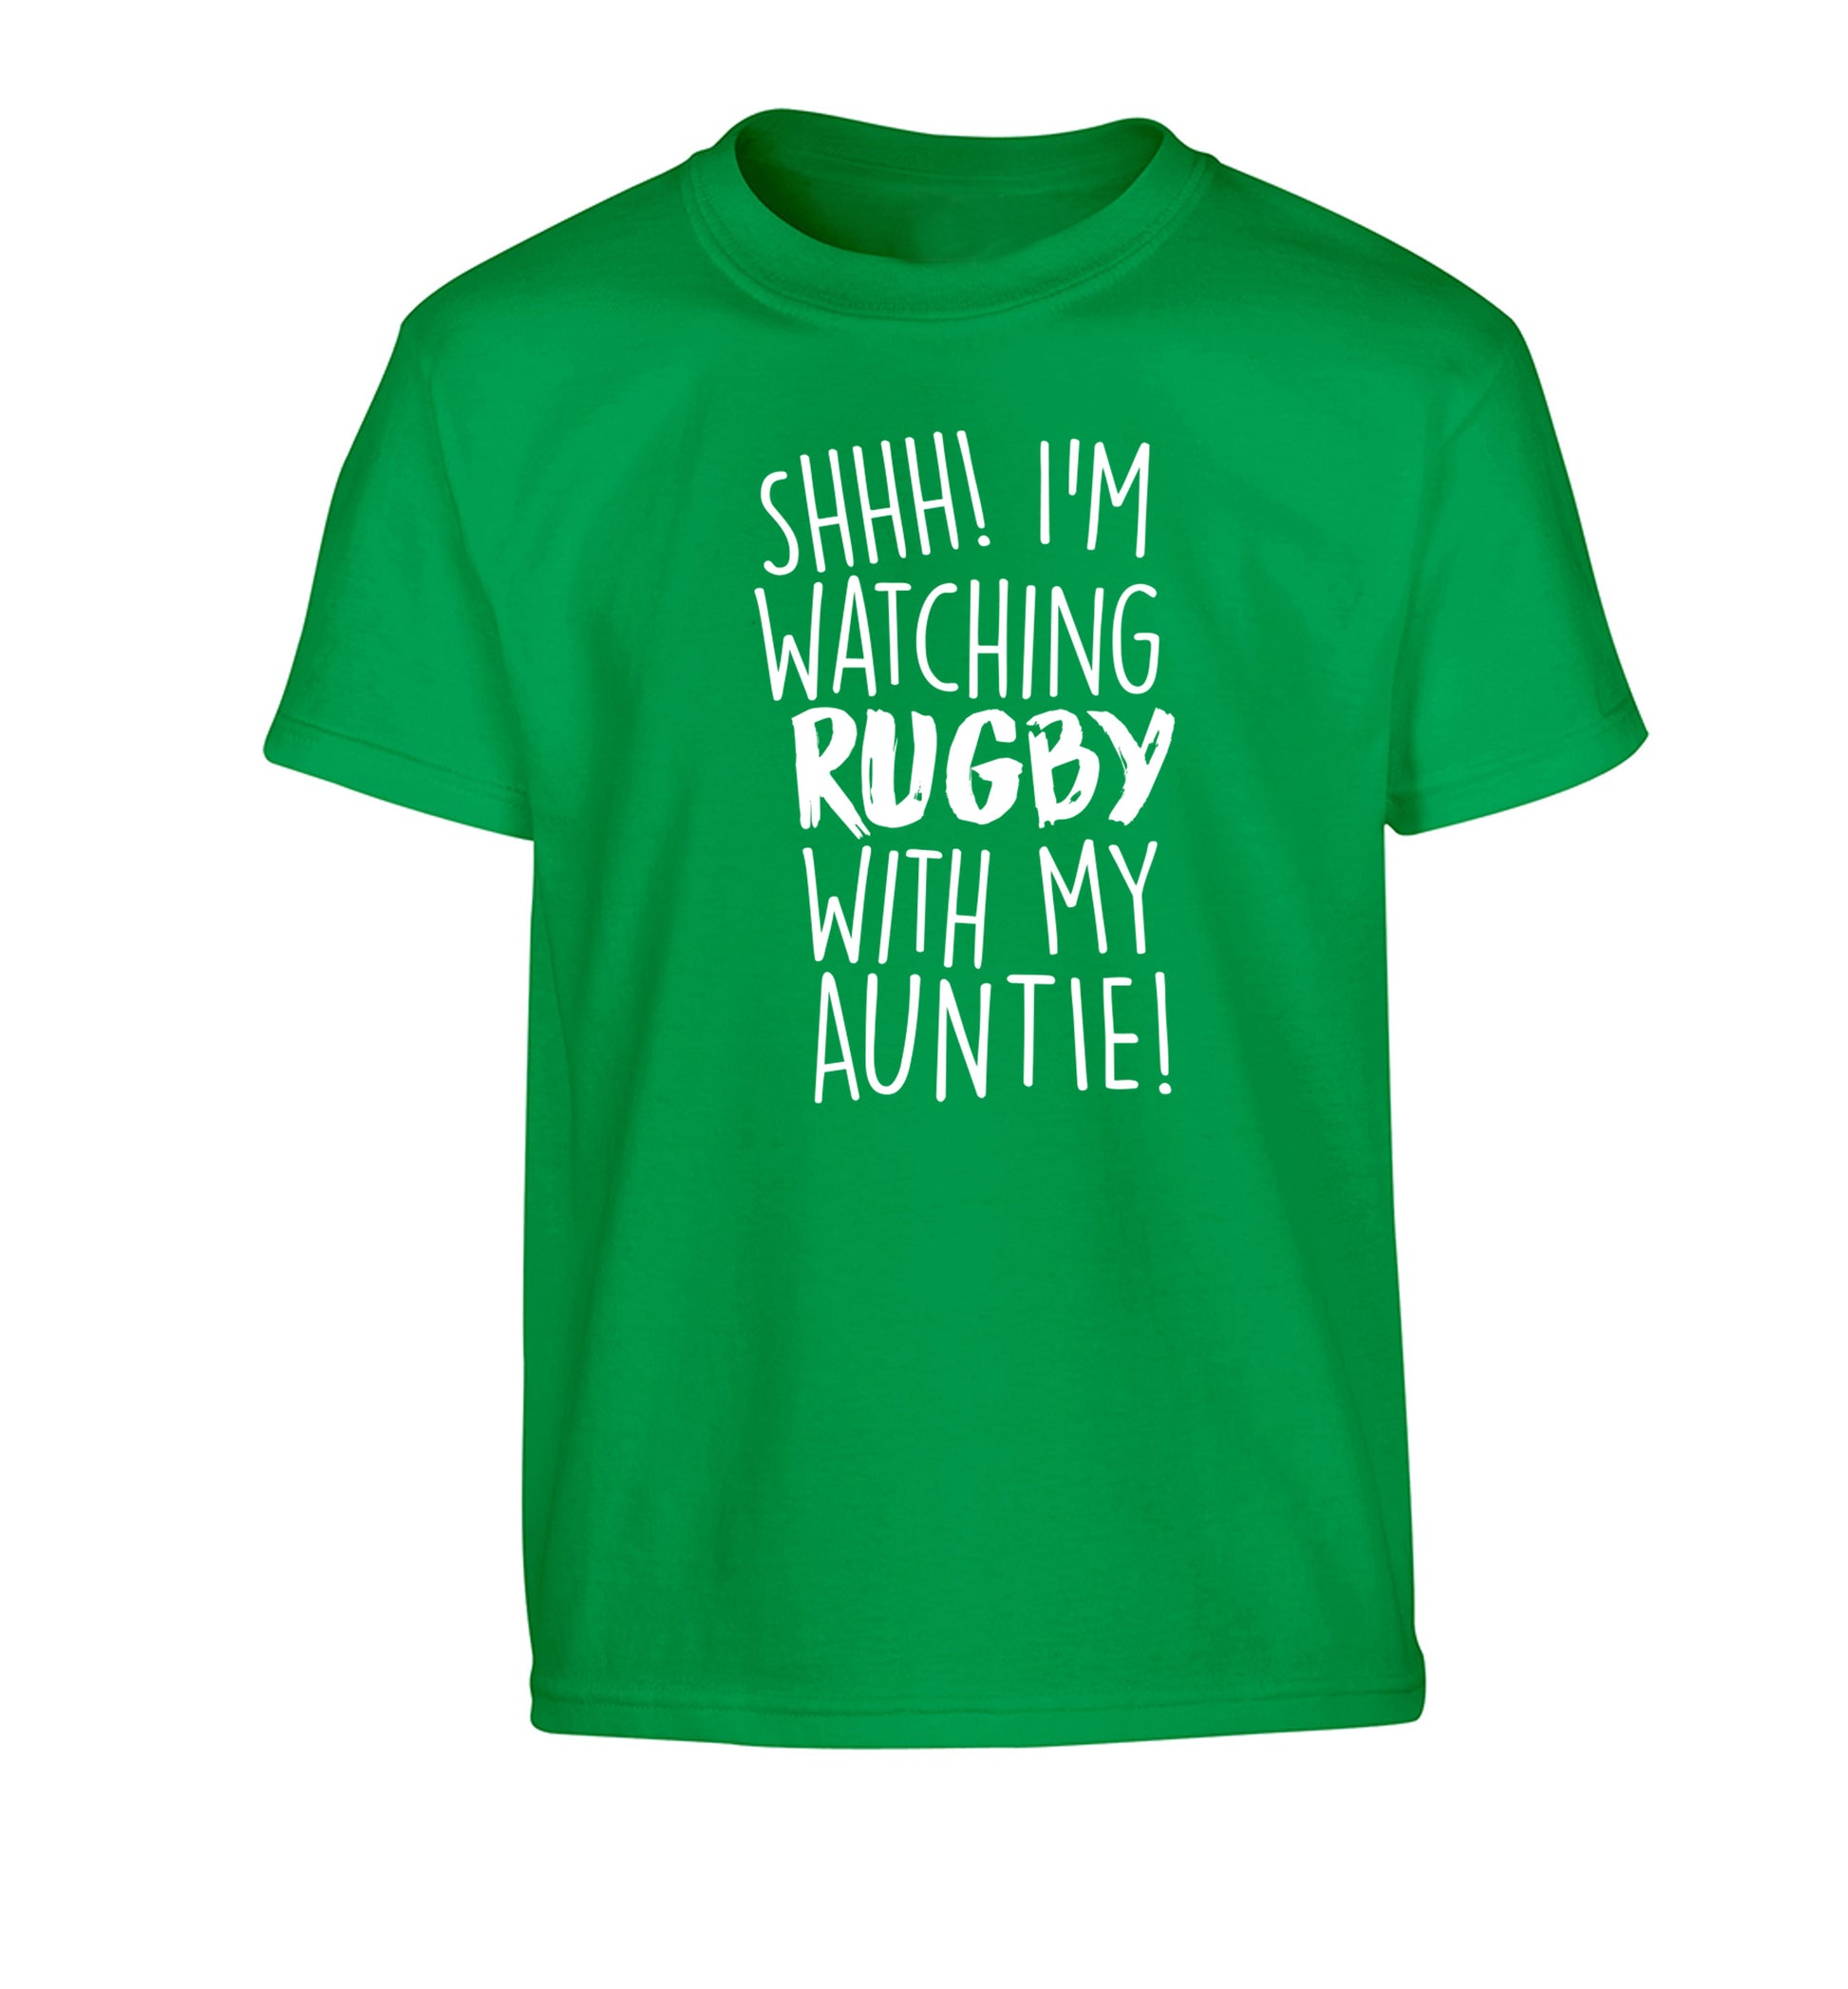 Shhh I'm watchin rugby with my auntie Children's green Tshirt 12-13 Years